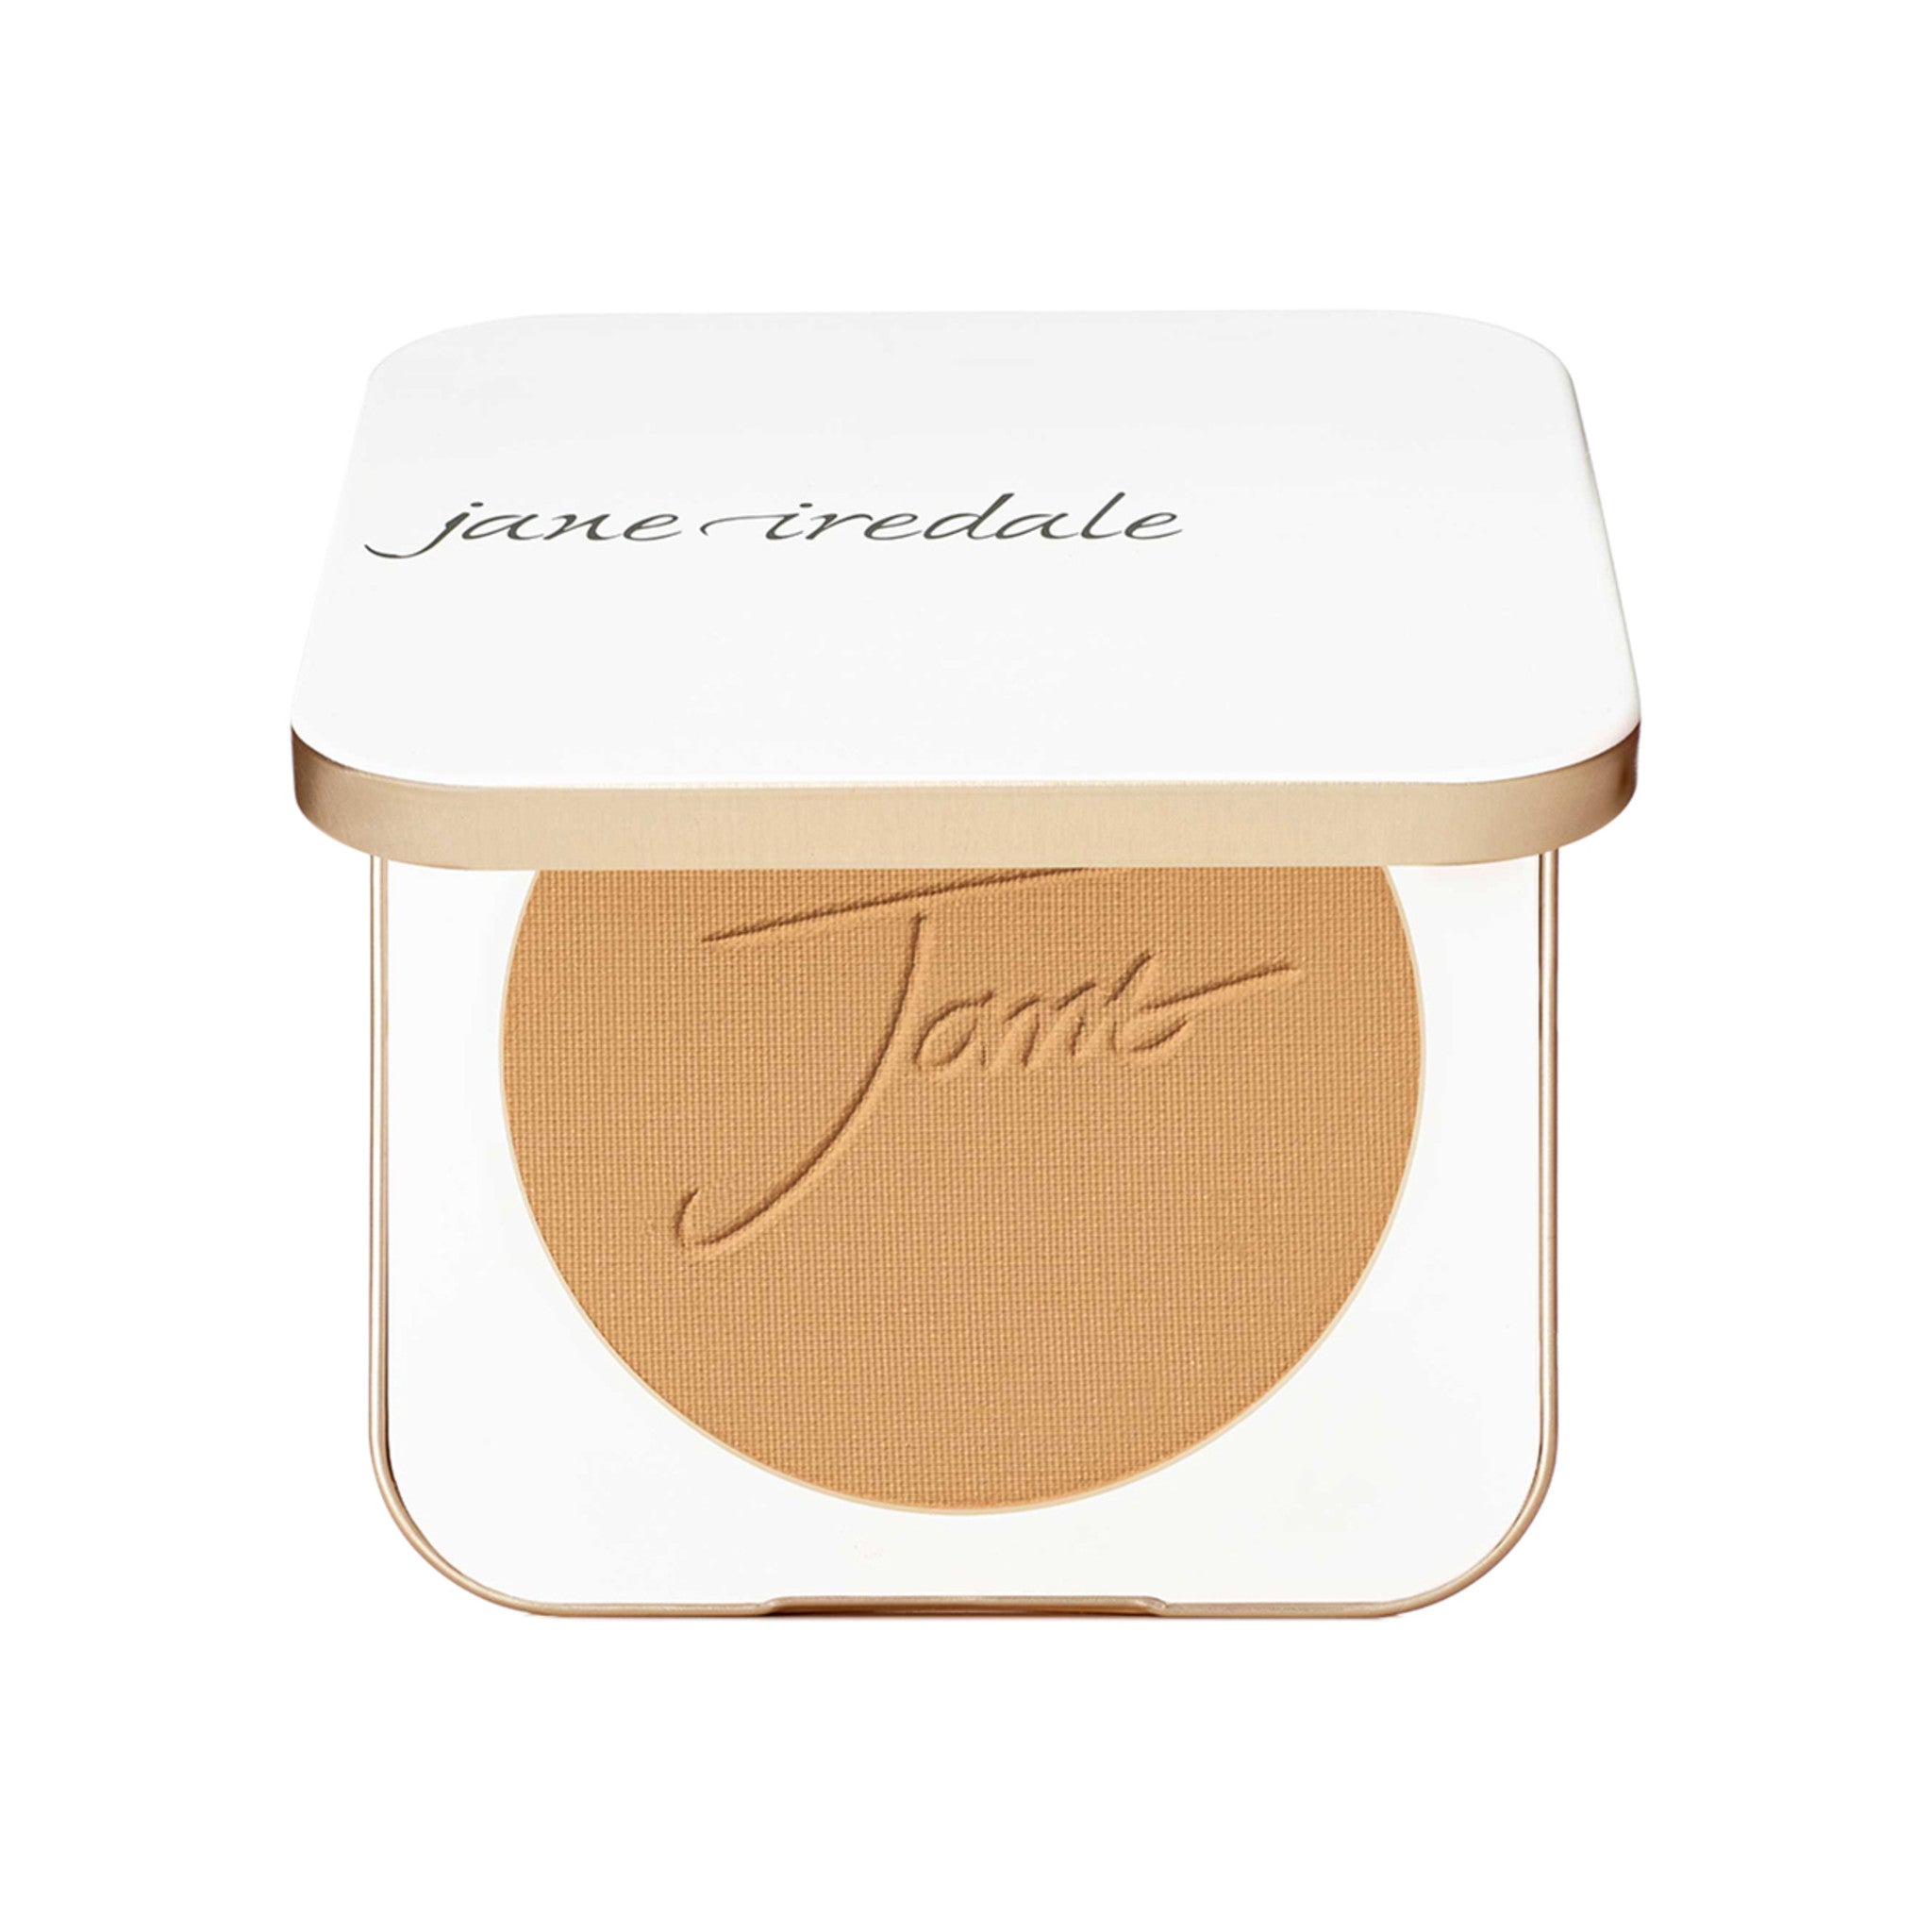 Jane Iredale PurePressed Base Mineral Foundation Refill Color/Shade variant: Golden Tan main image. This product is for medium warm complexions